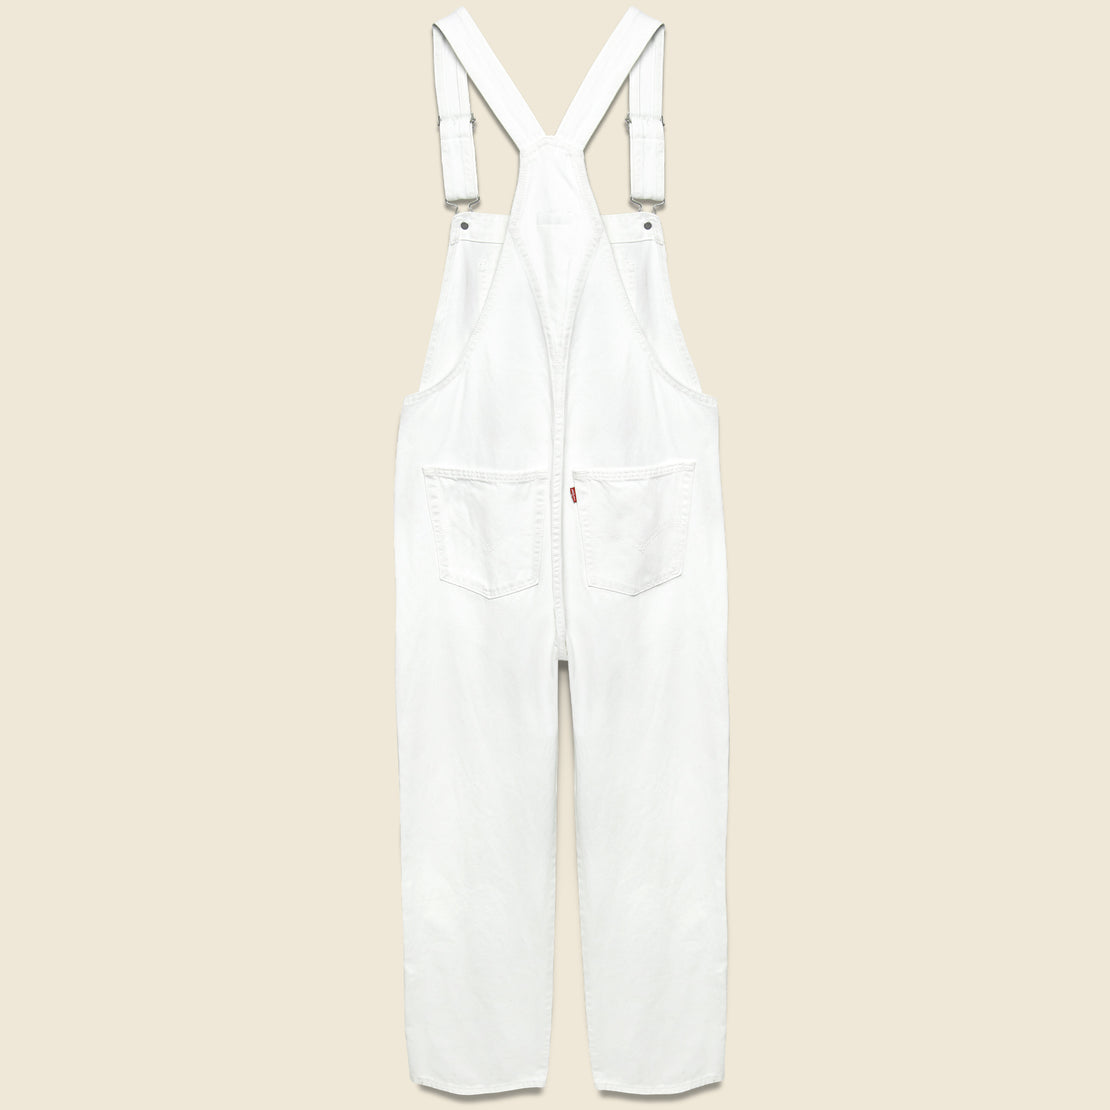 Vintage Overall - White Lie